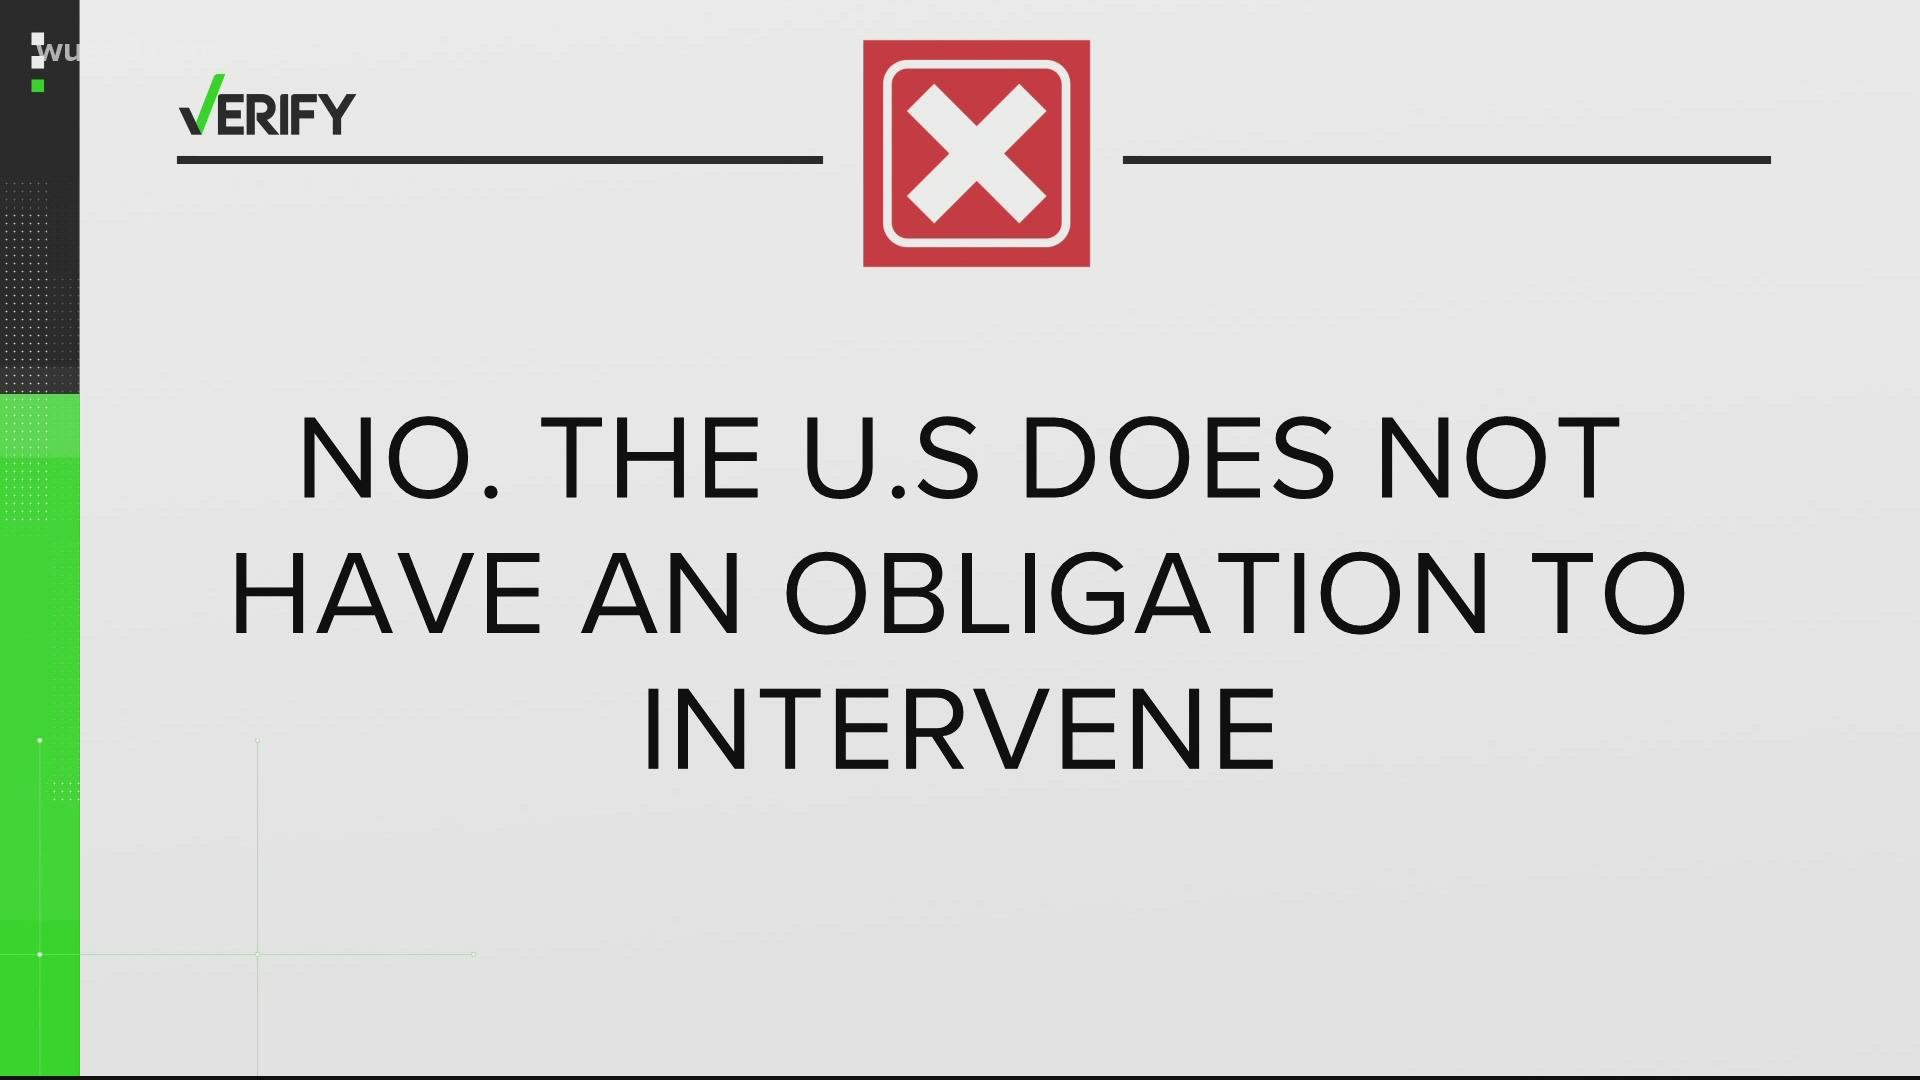 The US can intervene through article 51, but it doesn't have an obligation to intervene.